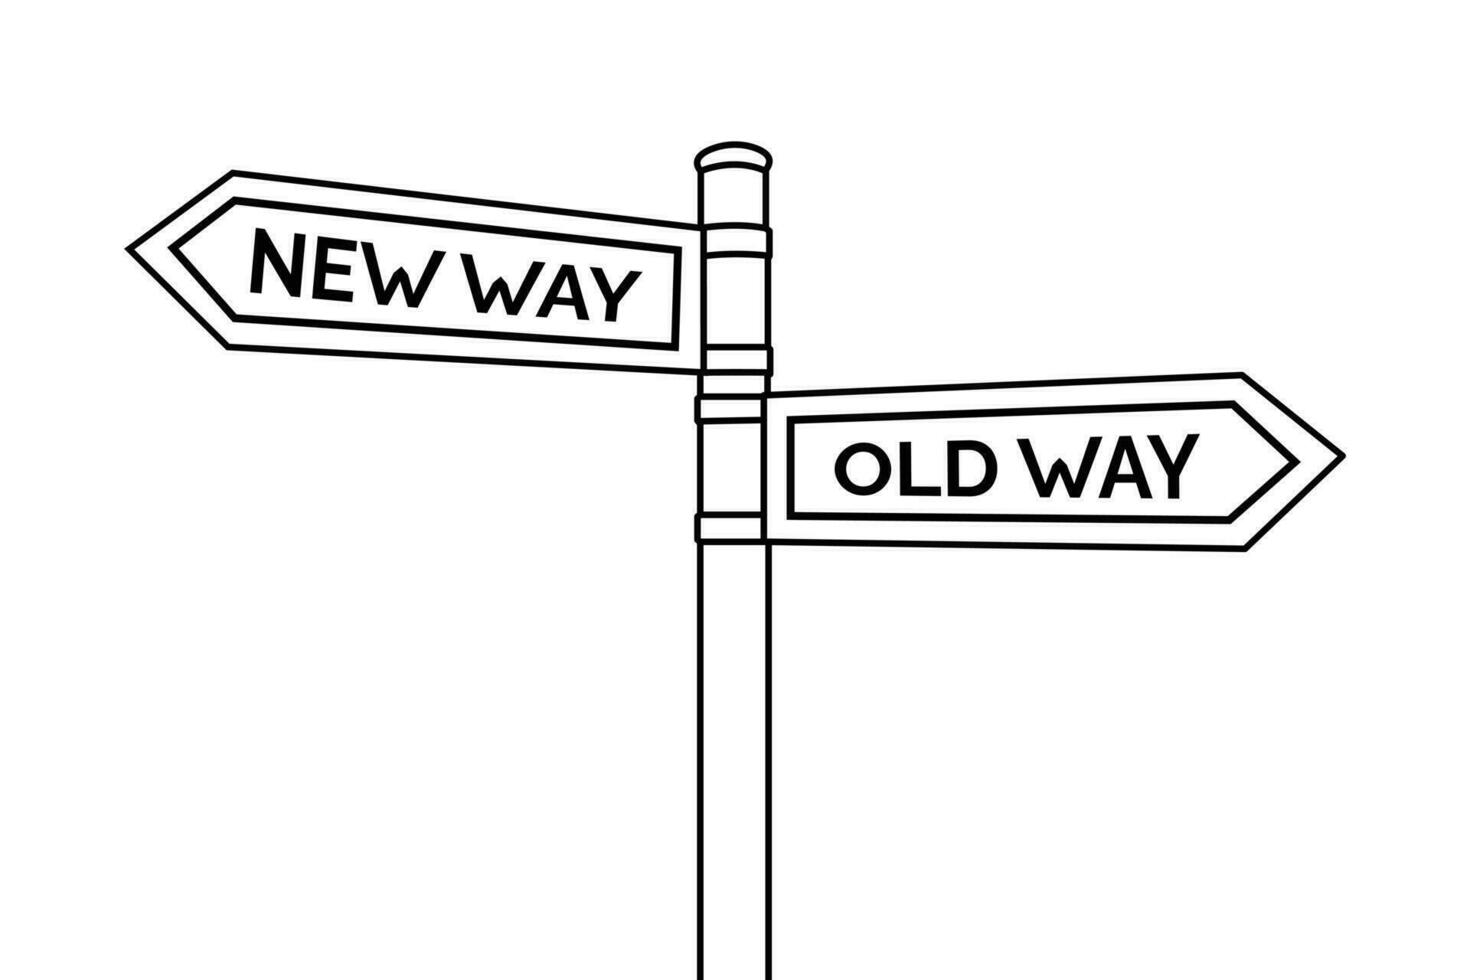 Business concepts vector of two road signs representing the Old Way and New Way